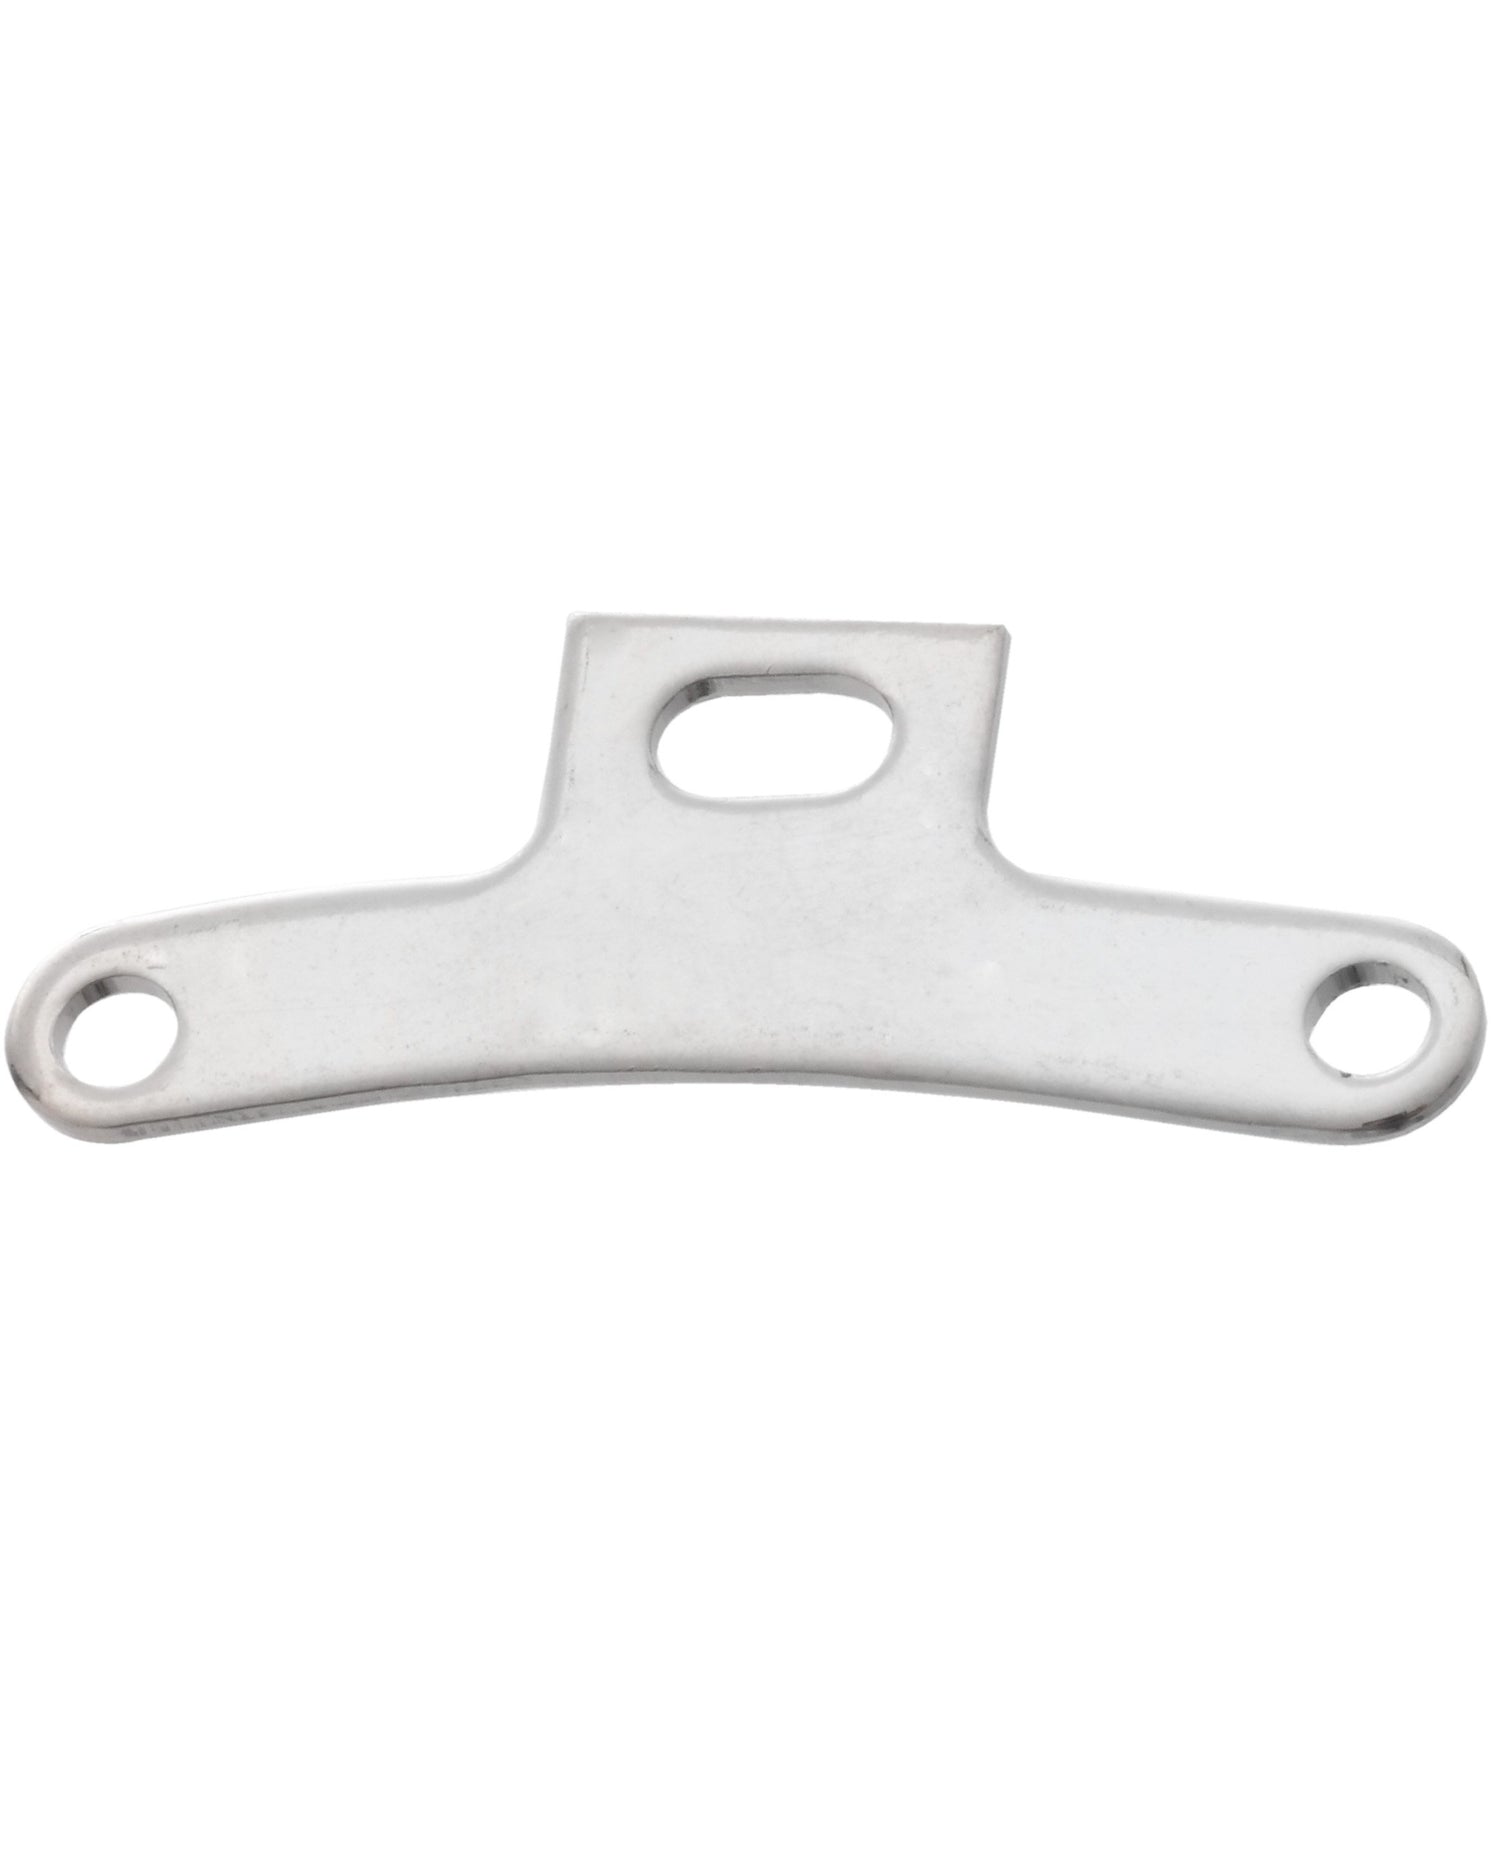 Image 1 of Banjo Tailpiece Bracket, T-Shaped - SKU# BA955T : Product Type Accessories & Parts : Elderly Instruments